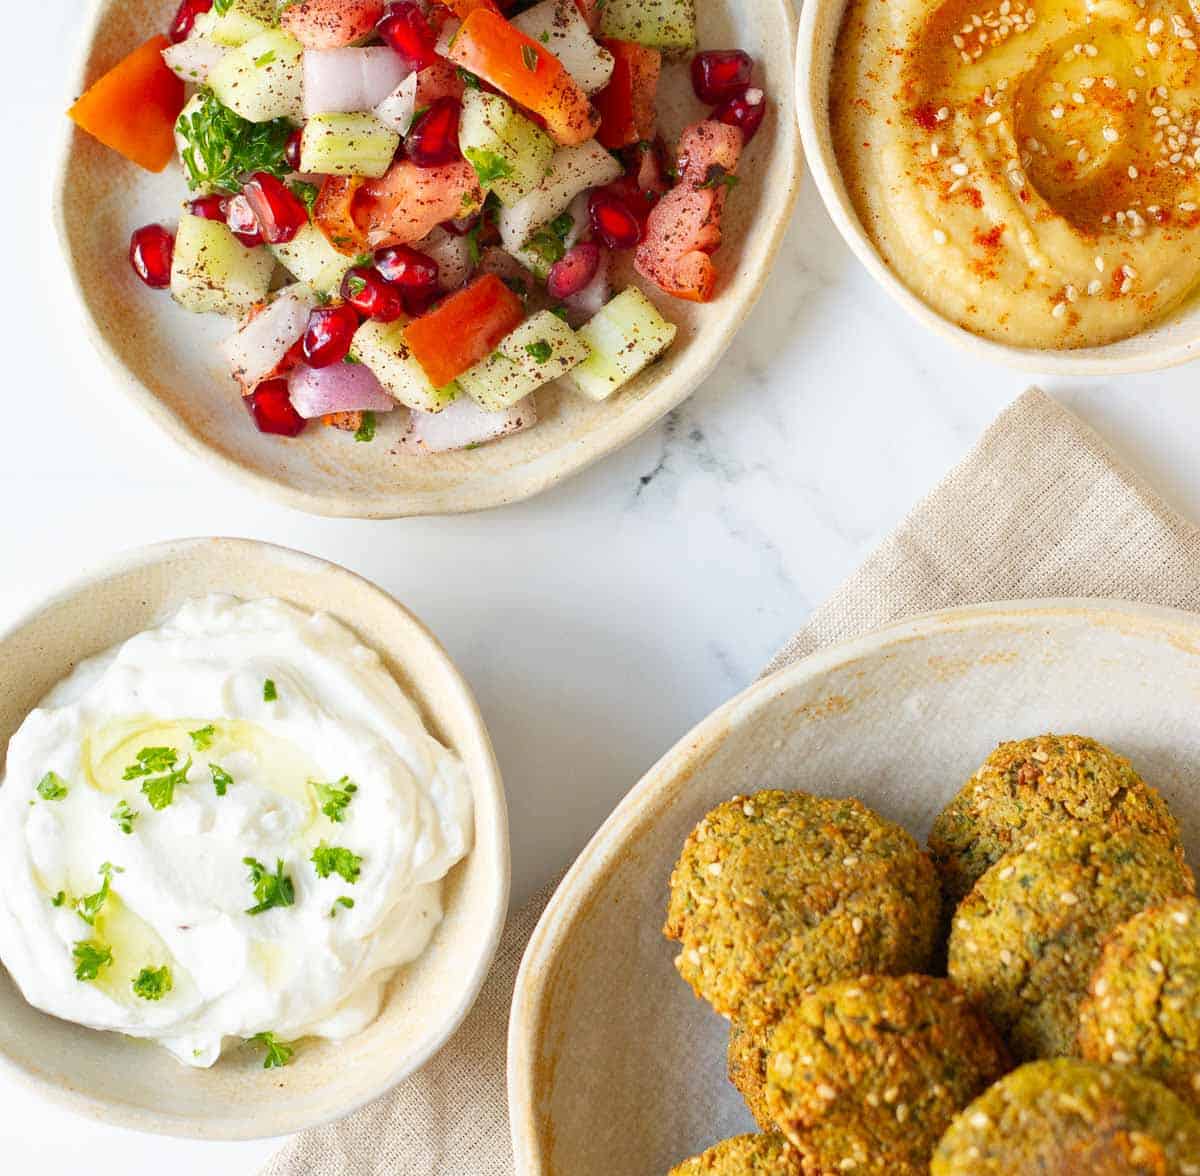 dips and salads to serve the falafels